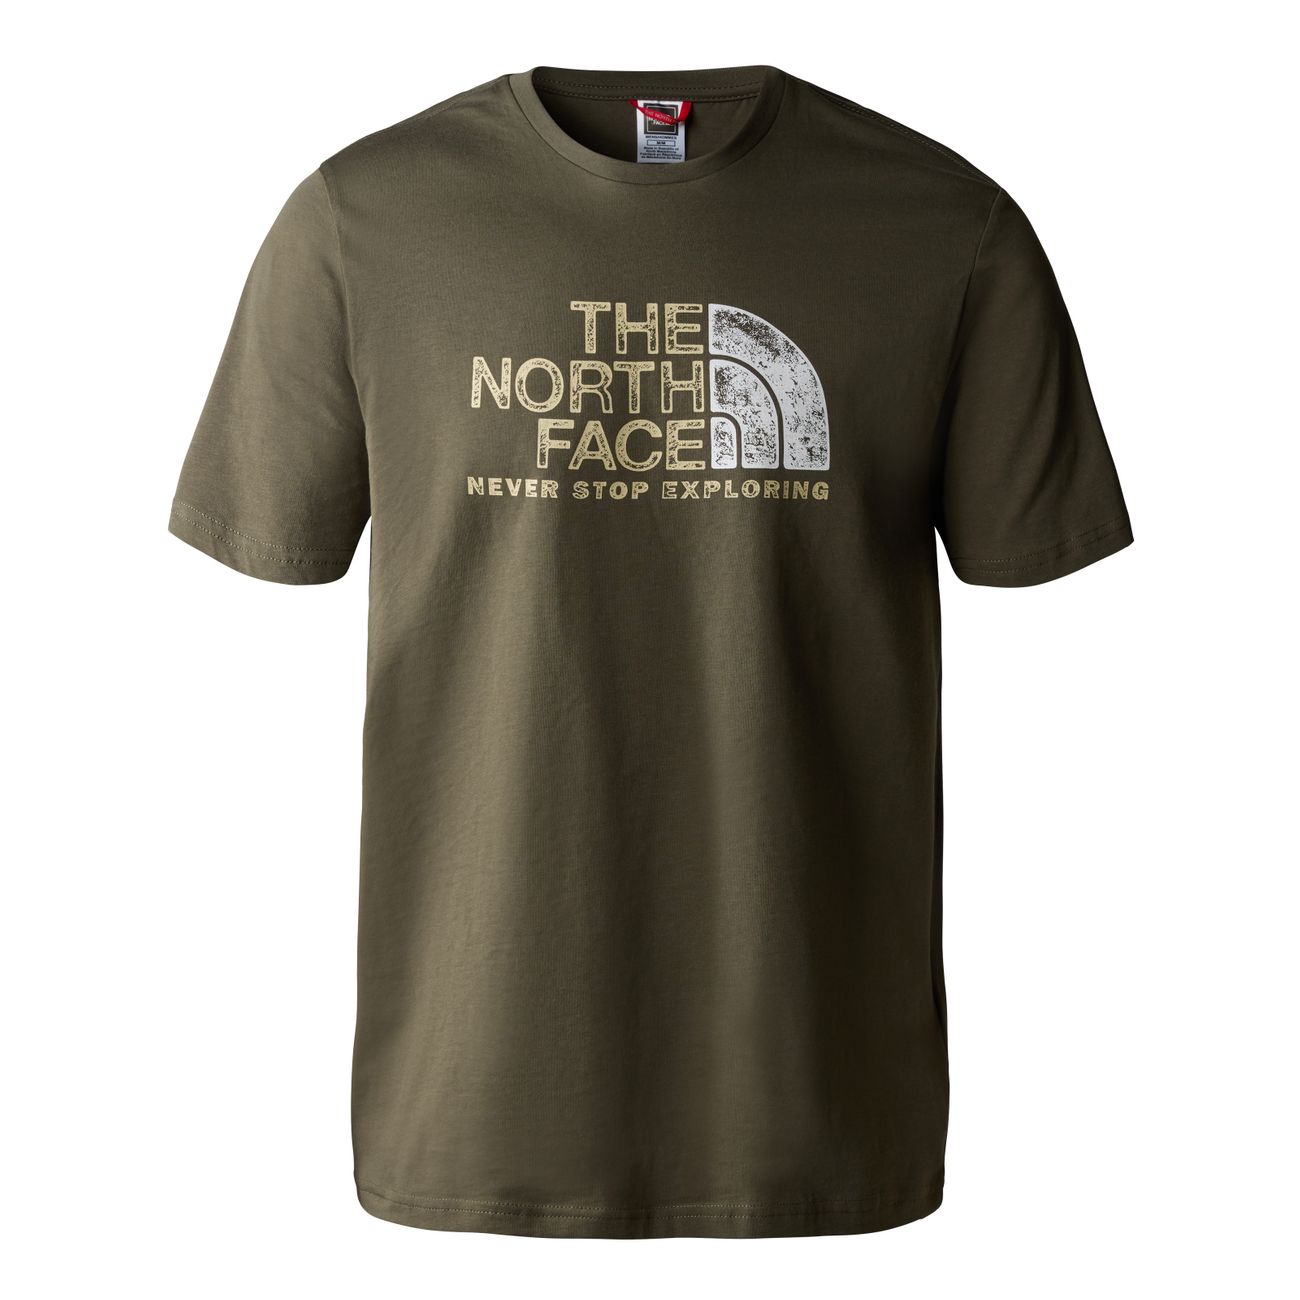 THE NORTH FACE M S/S RUST 2 TEE Herren T-Shirt - The North Face - SAGATOO - 196249630419